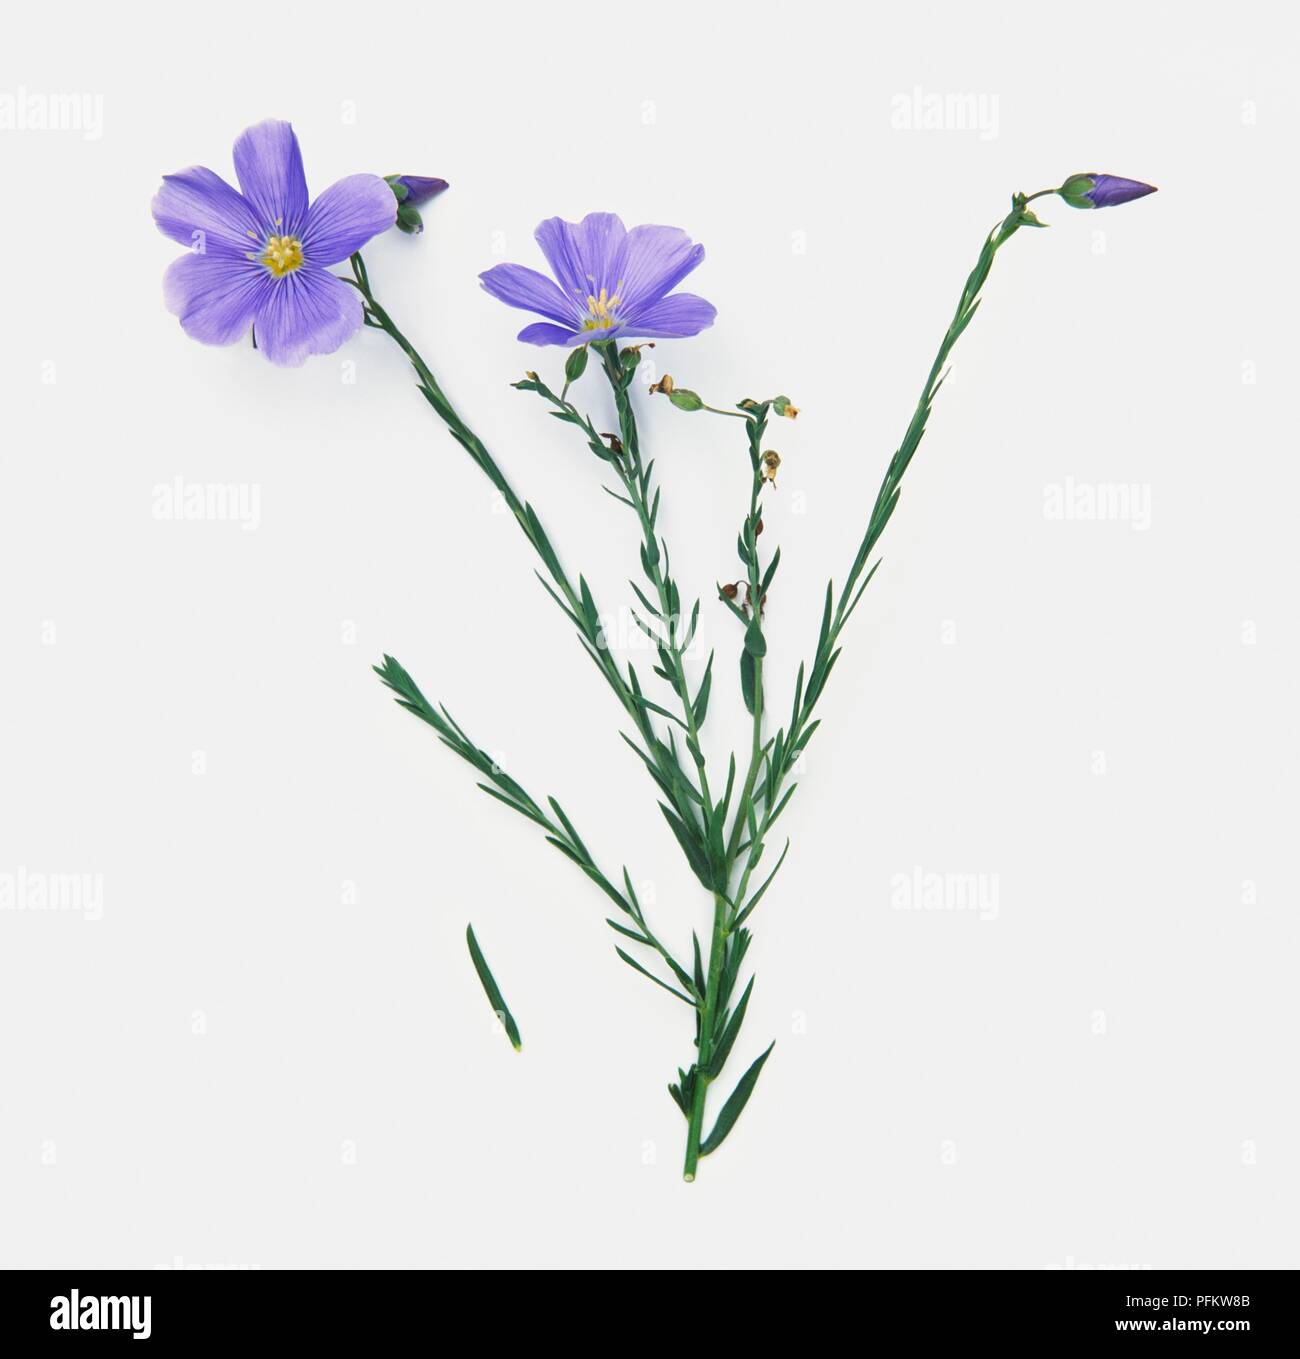 Linum catharticum (Fairy flax), stems with blue flowers, buds and tiny fruit capsules Stock Photo